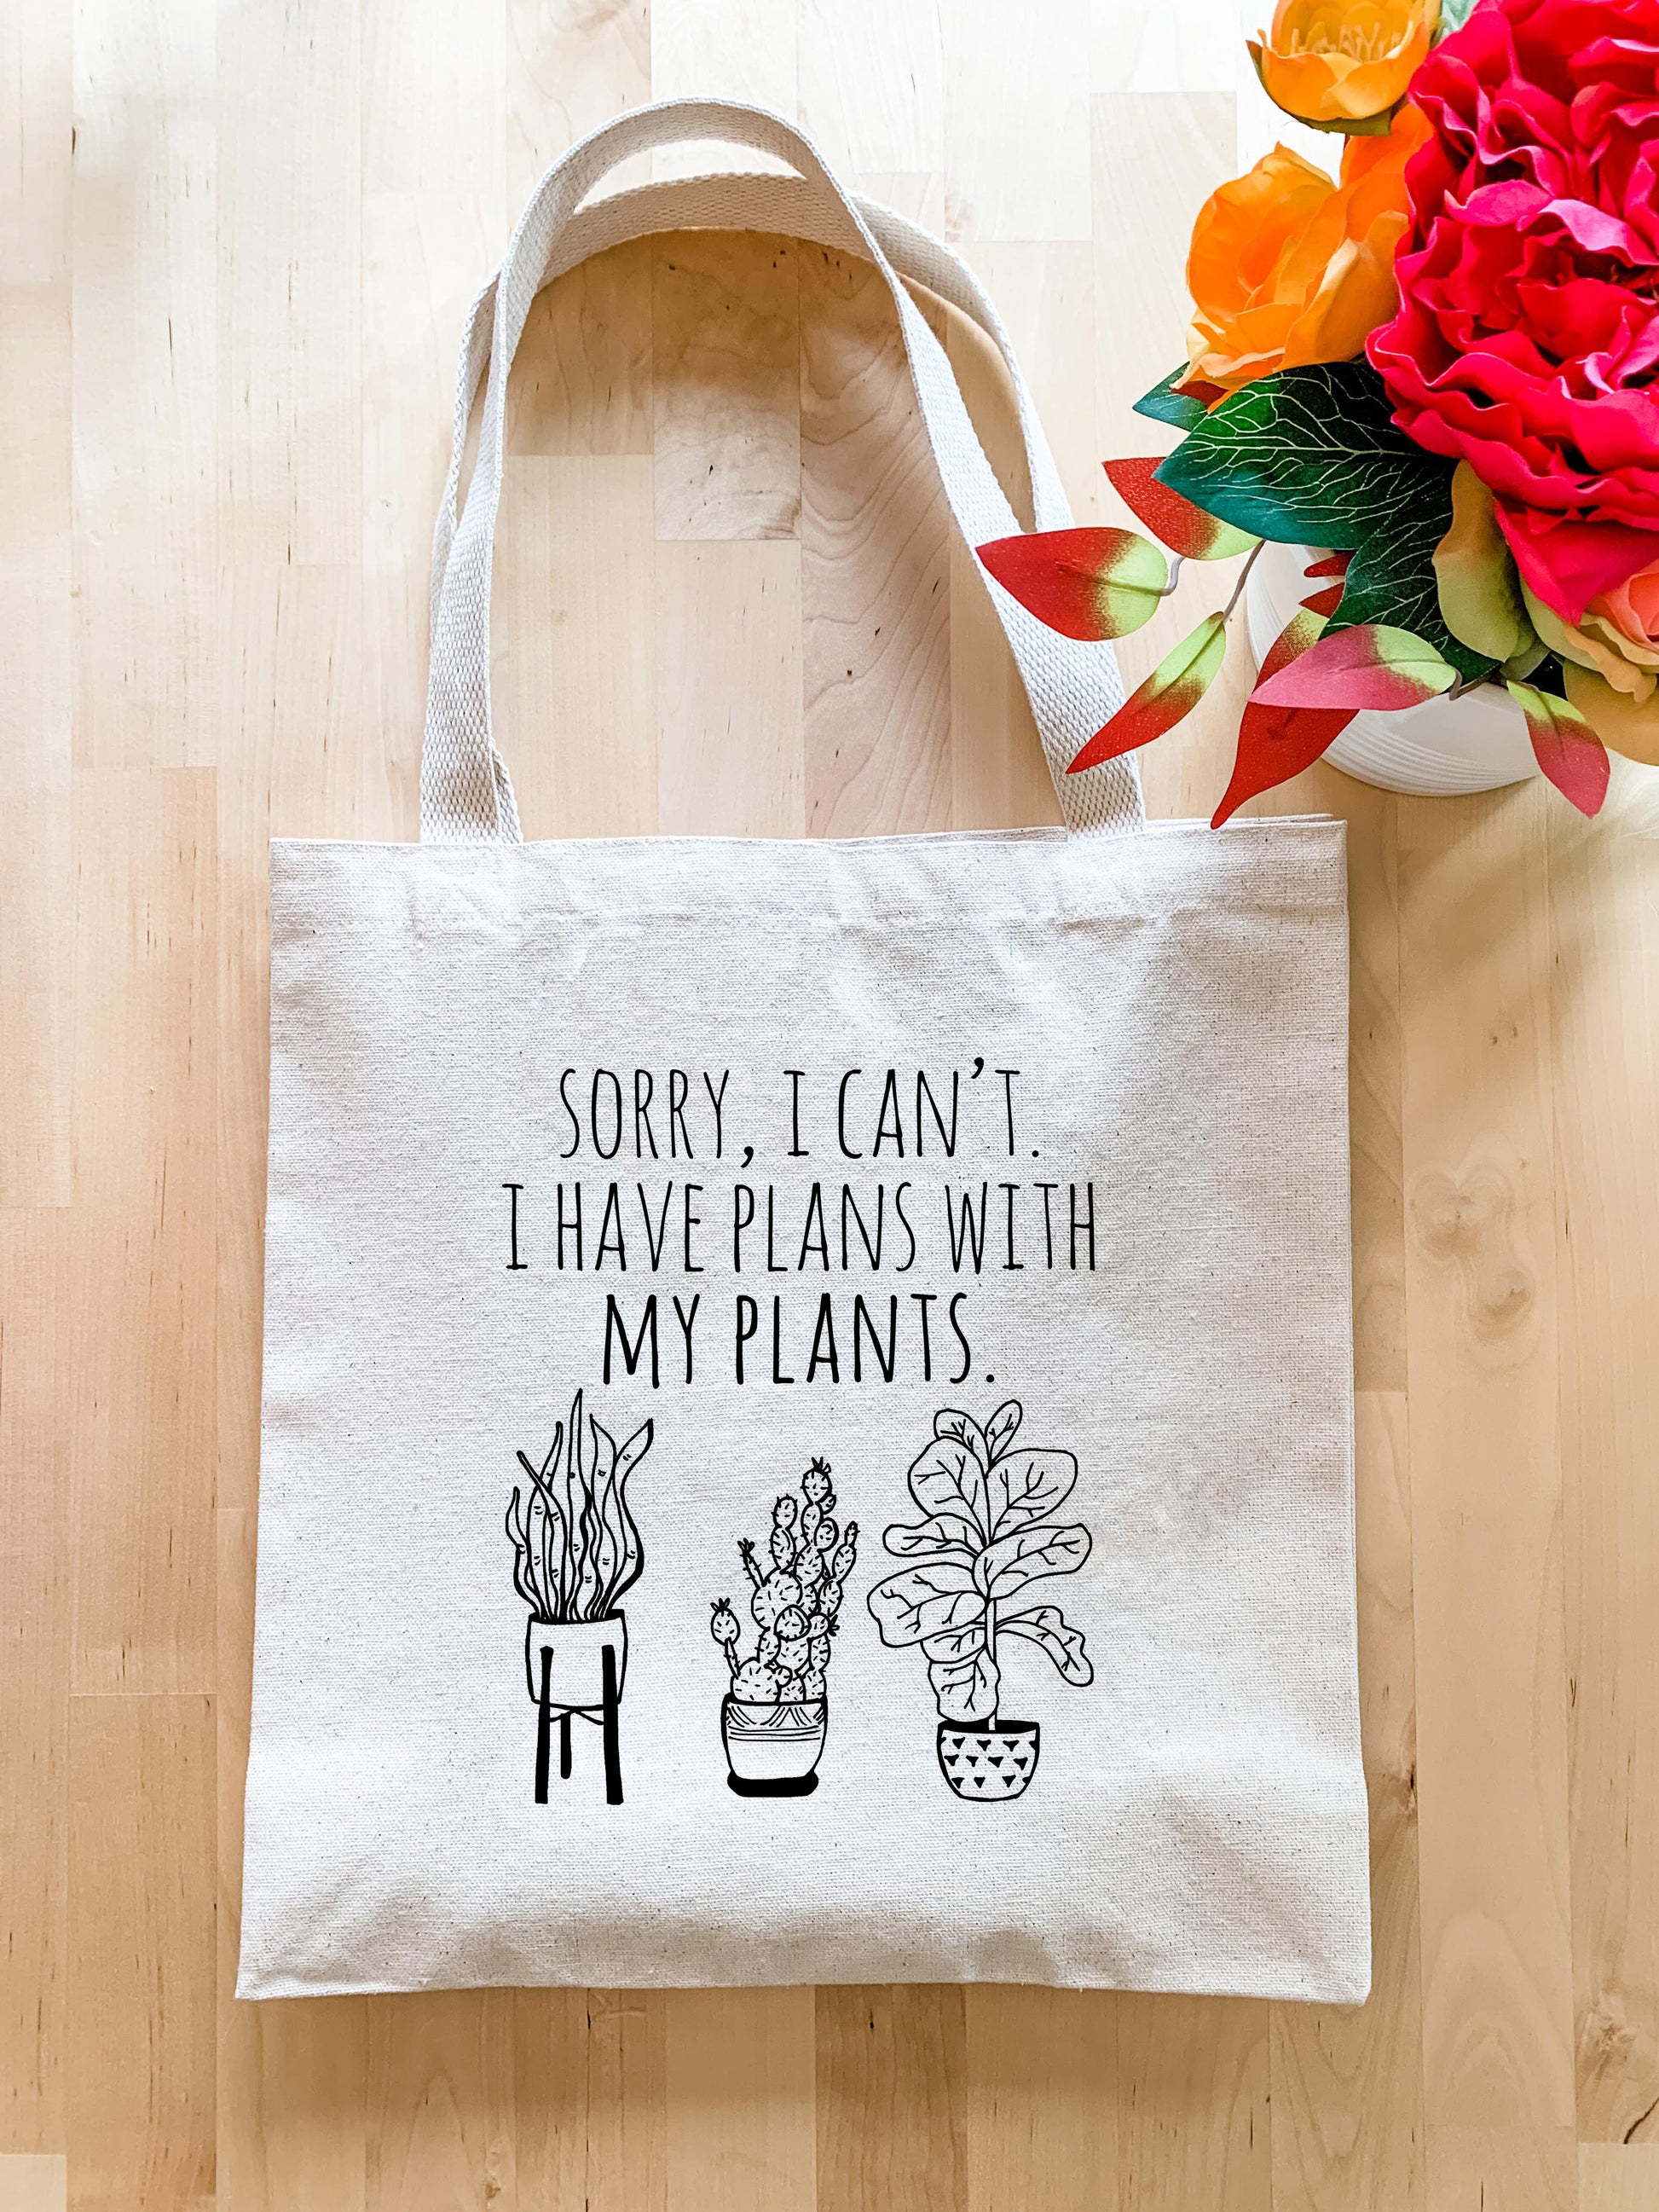 Sorry, I Can't. I Have Plans With My Plans - Tote Bag - MoonlightMakers